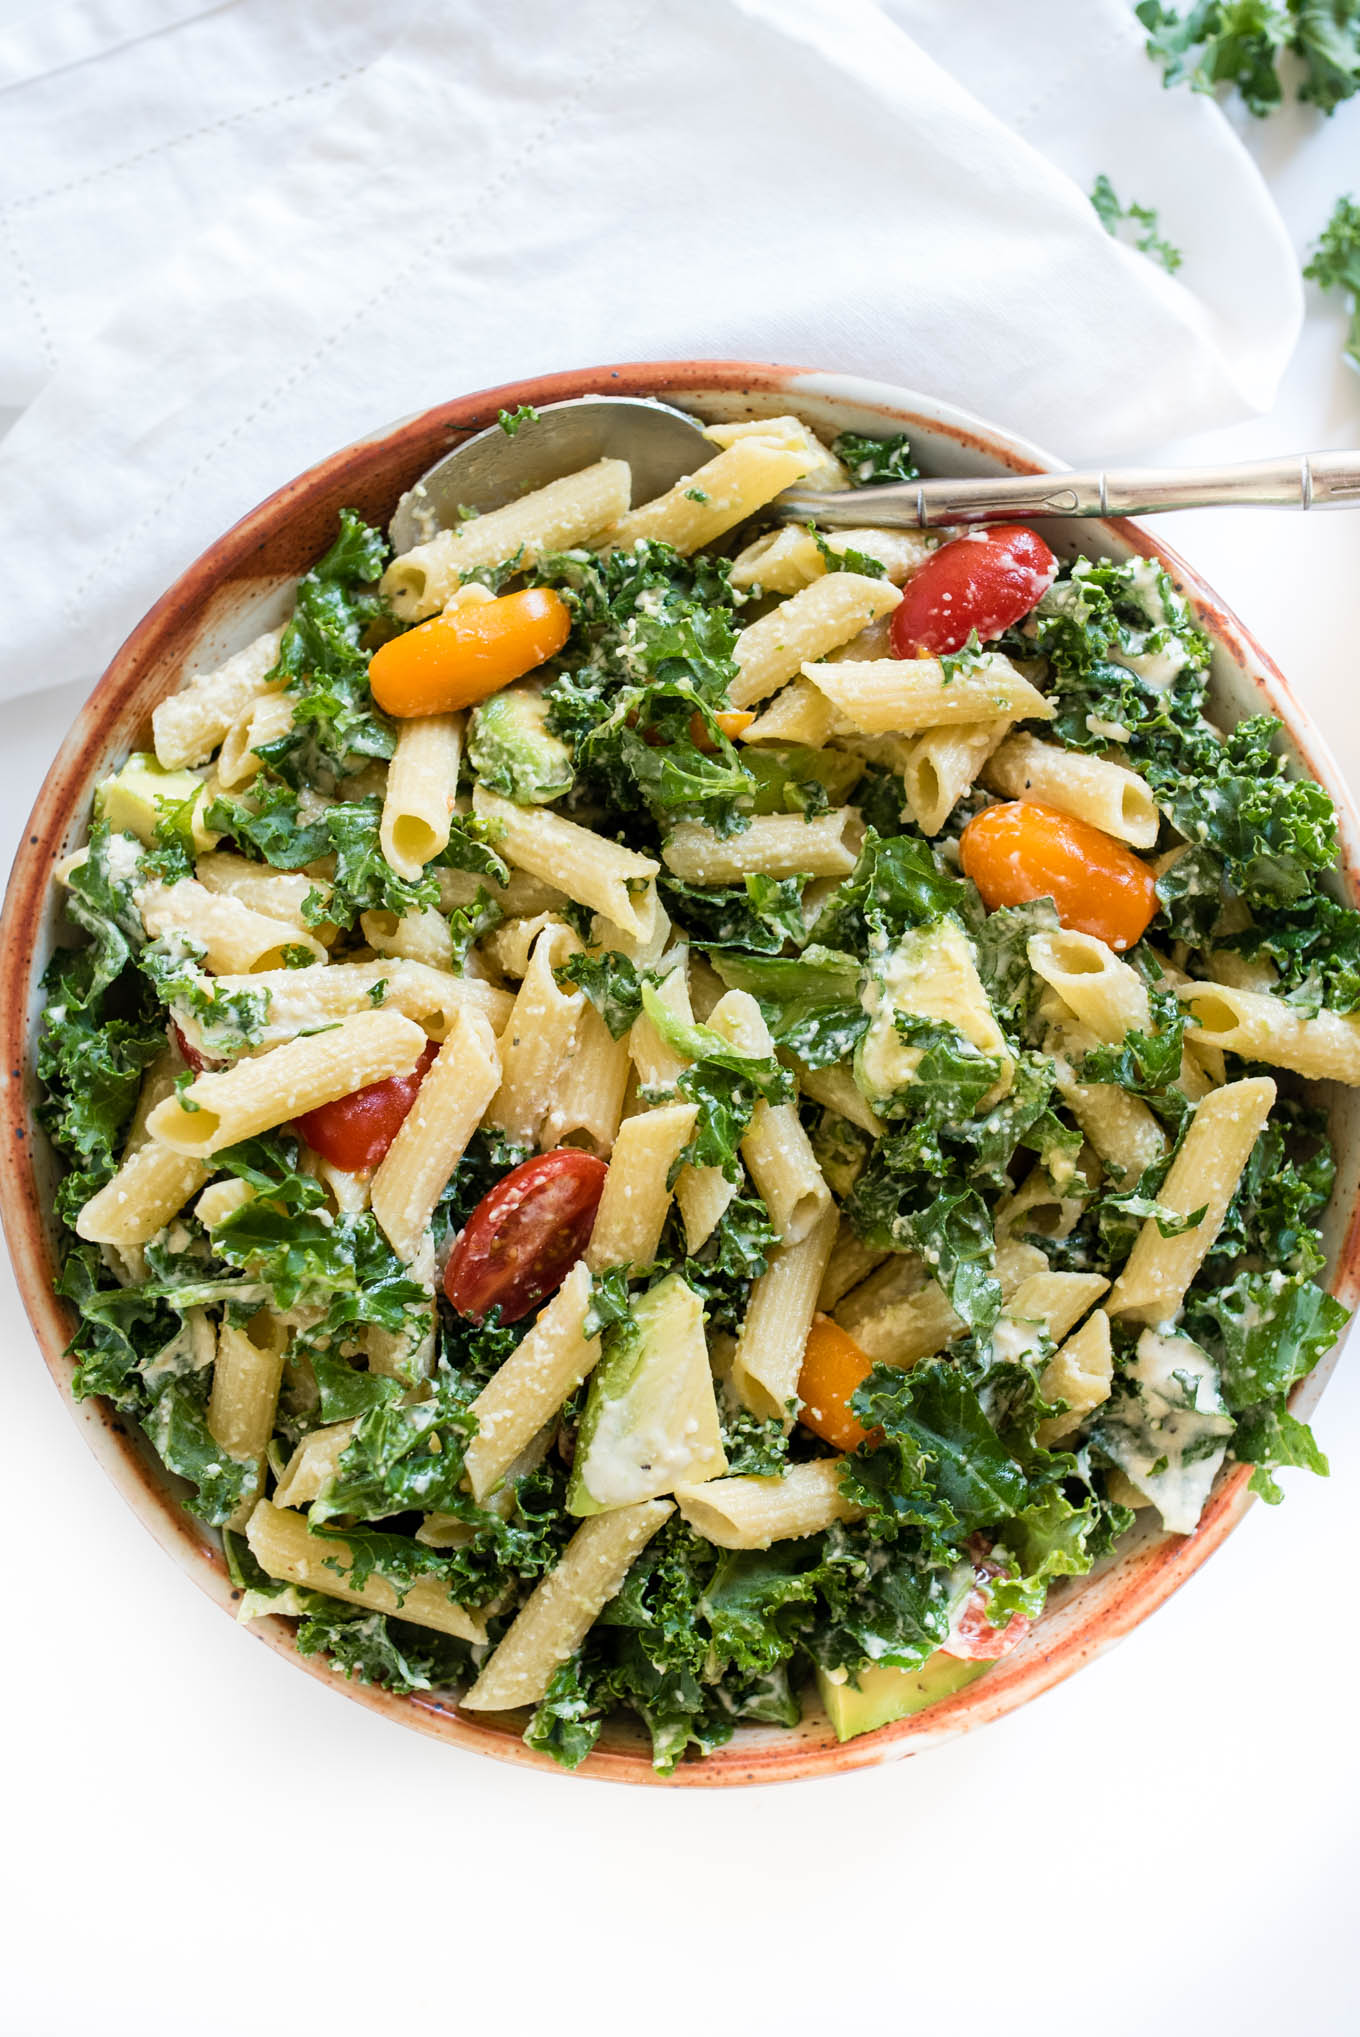 Kale Caesar Pasta Salad is a great vegetarian pasta salad packed with kale, avocado and a simple homemade Caesar dressing. 